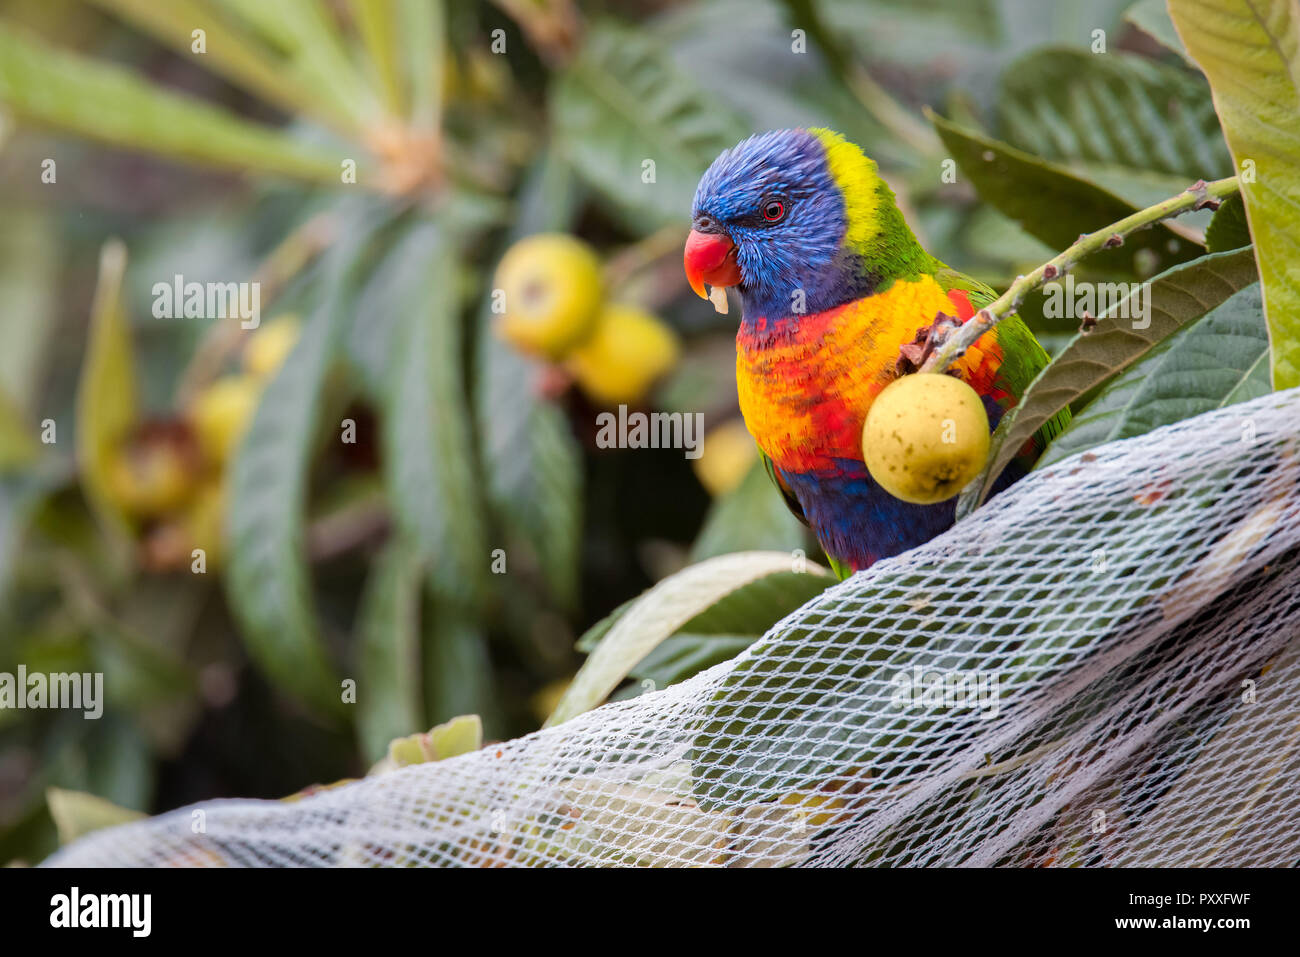 A Rainbow Lorikeet eats a loquat while perched on some netting intended to keep it and other wildlife away from the fruit in Adelaide, South Australia Stock Photo